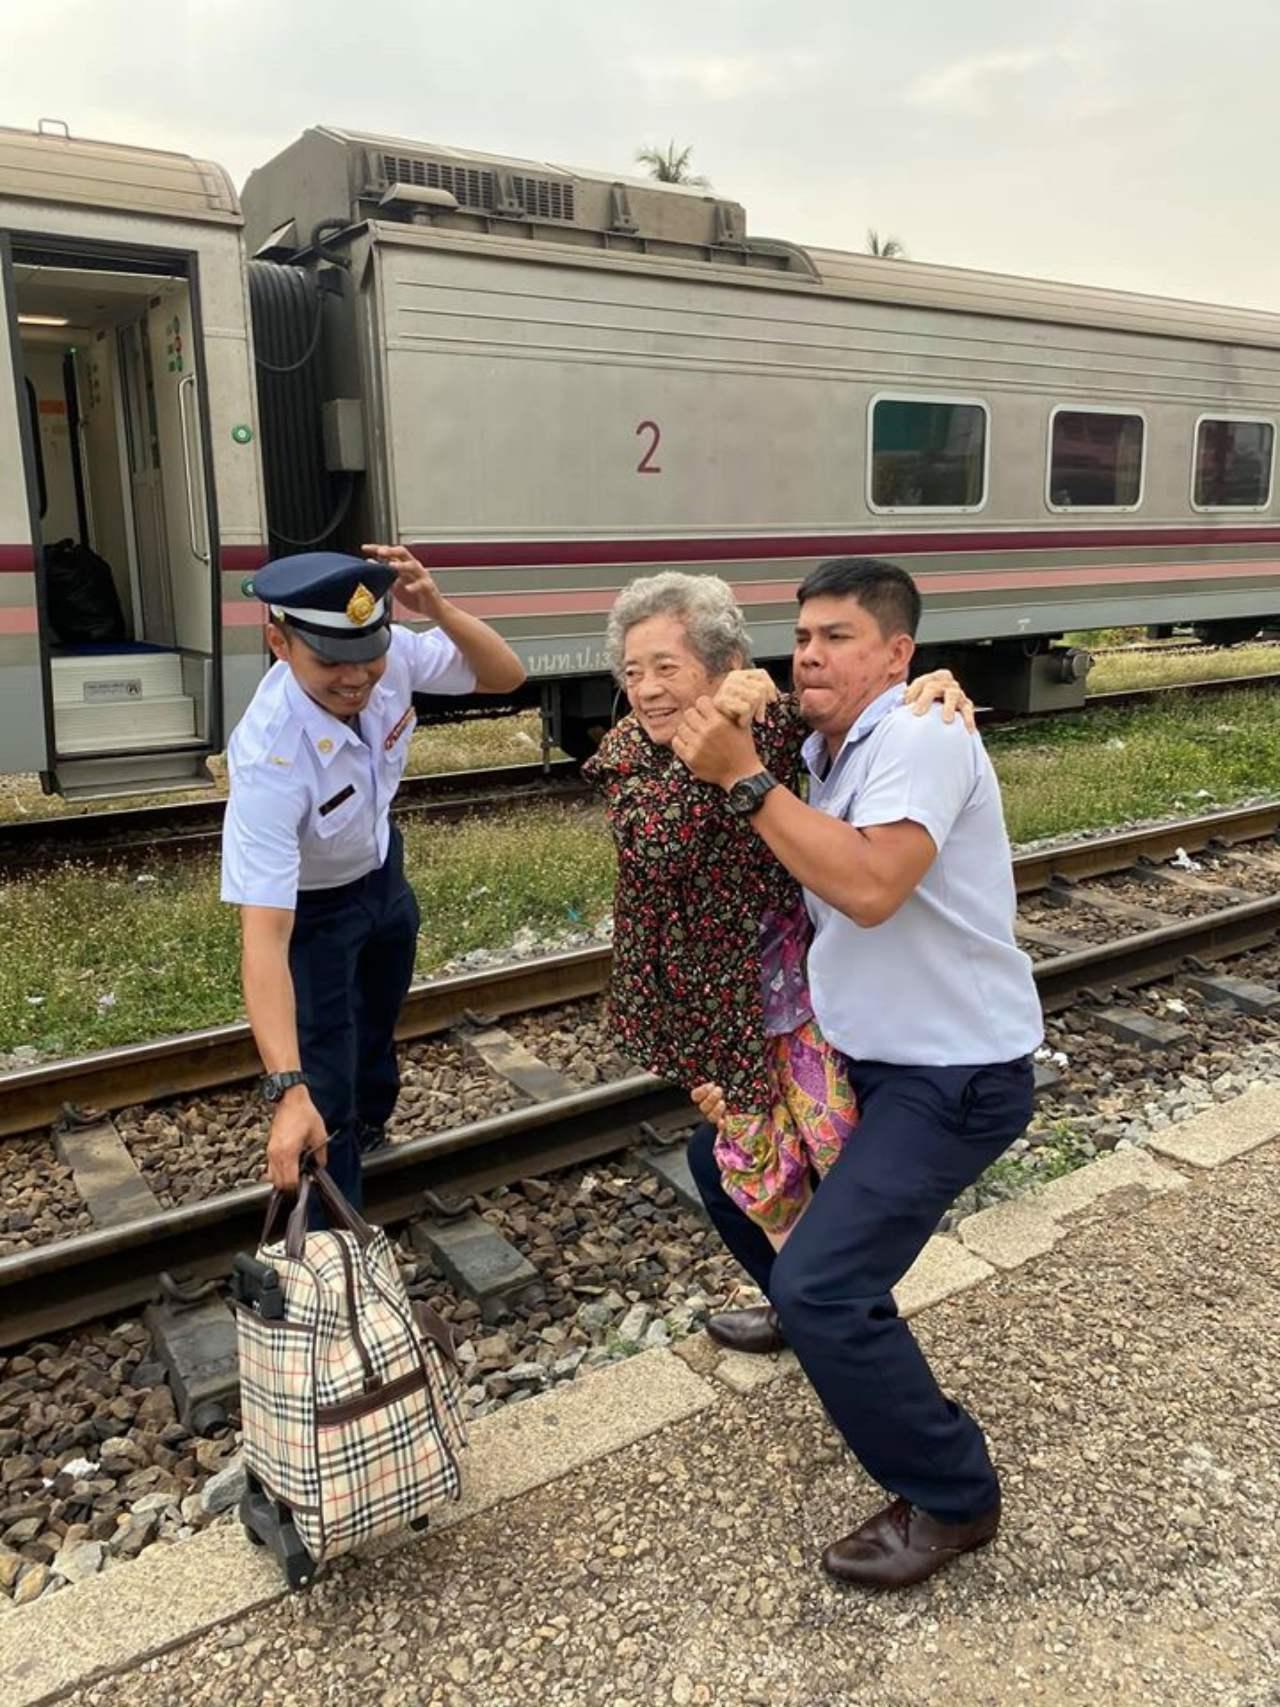 Grandma Has Difficulty Getting Off Train, Conductor Comes To The Rescue And Carries Her Across Tracks